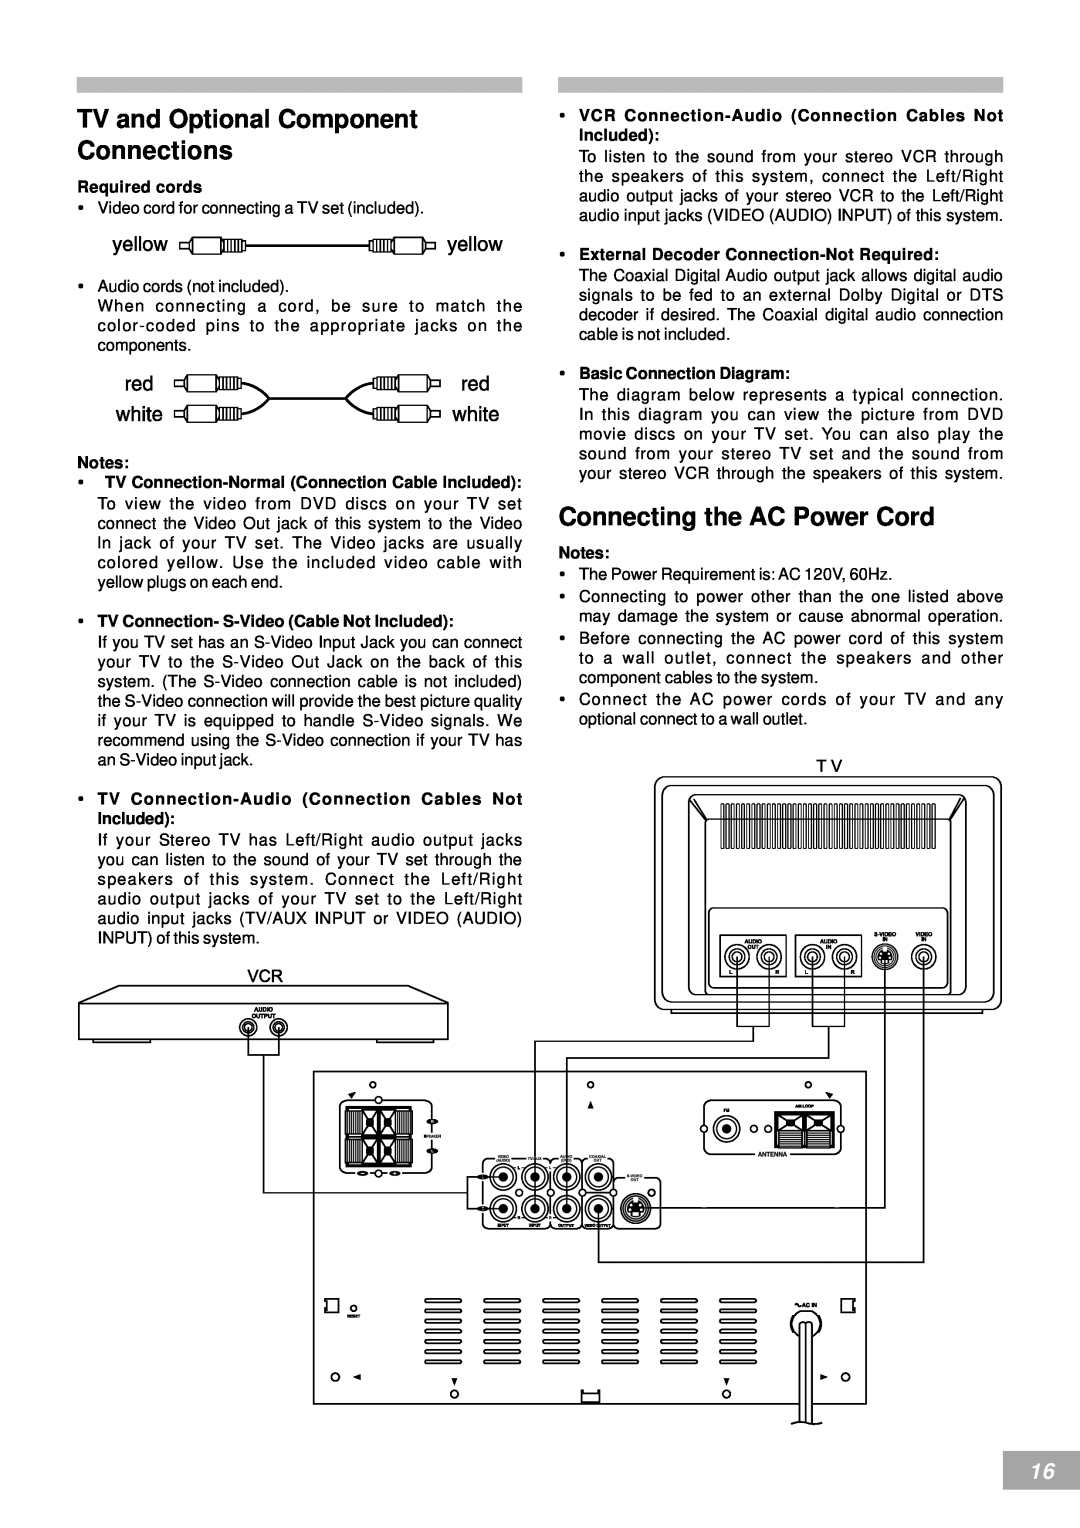 Emerson AV50 TV and Optional Component Connections, Connecting the AC Power Cord, Required cords, Basic Connection Diagram 